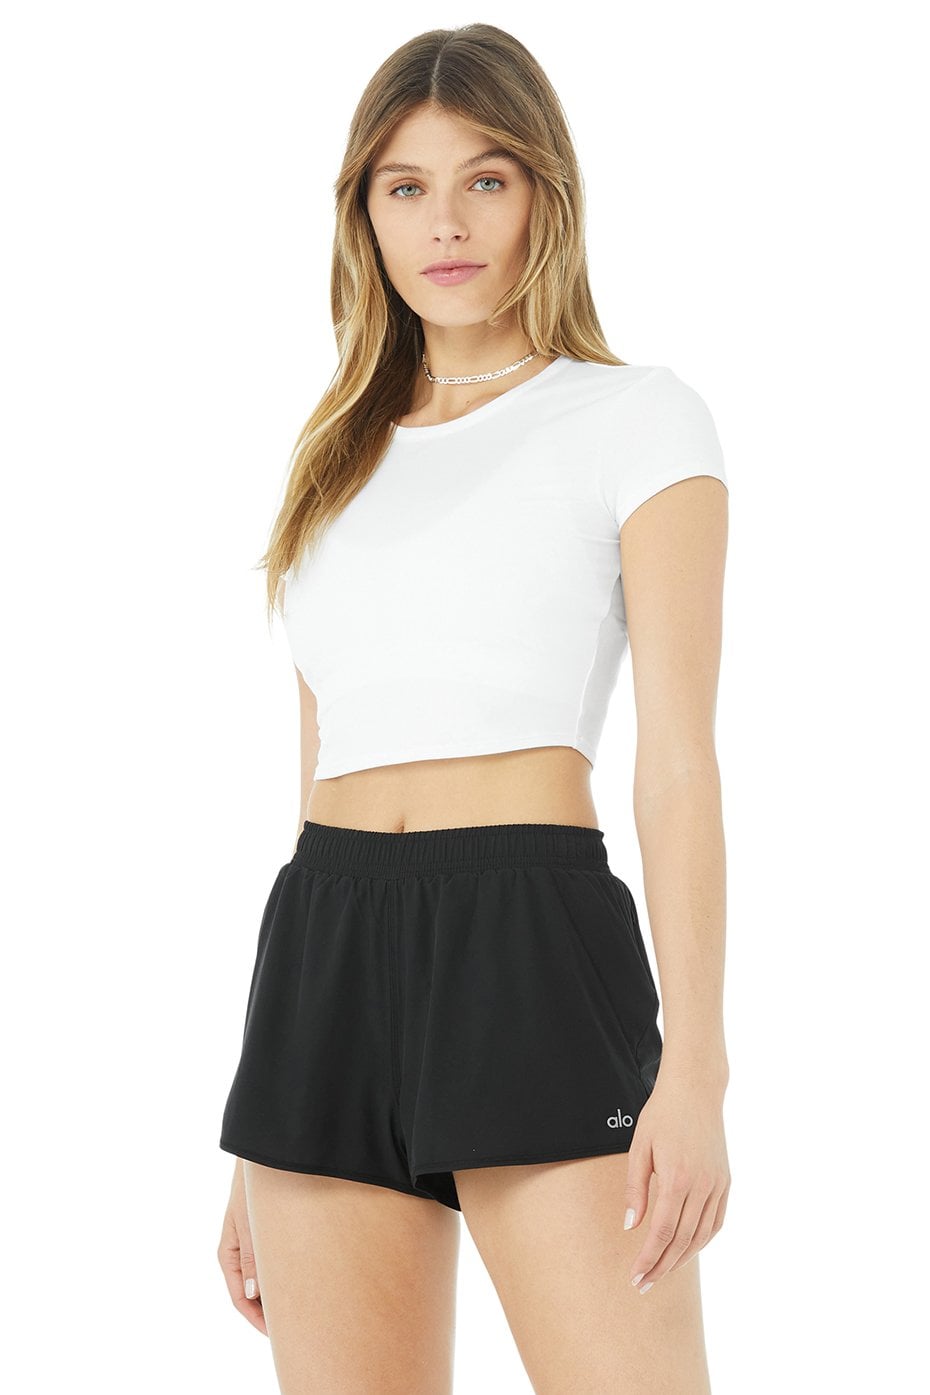 A Cropped T-Shirt: Alo Alosoft Crop Finesse Short Sleeve, 11 Cute Alo Yoga  Pieces Worth Scooping Up, All Under $100